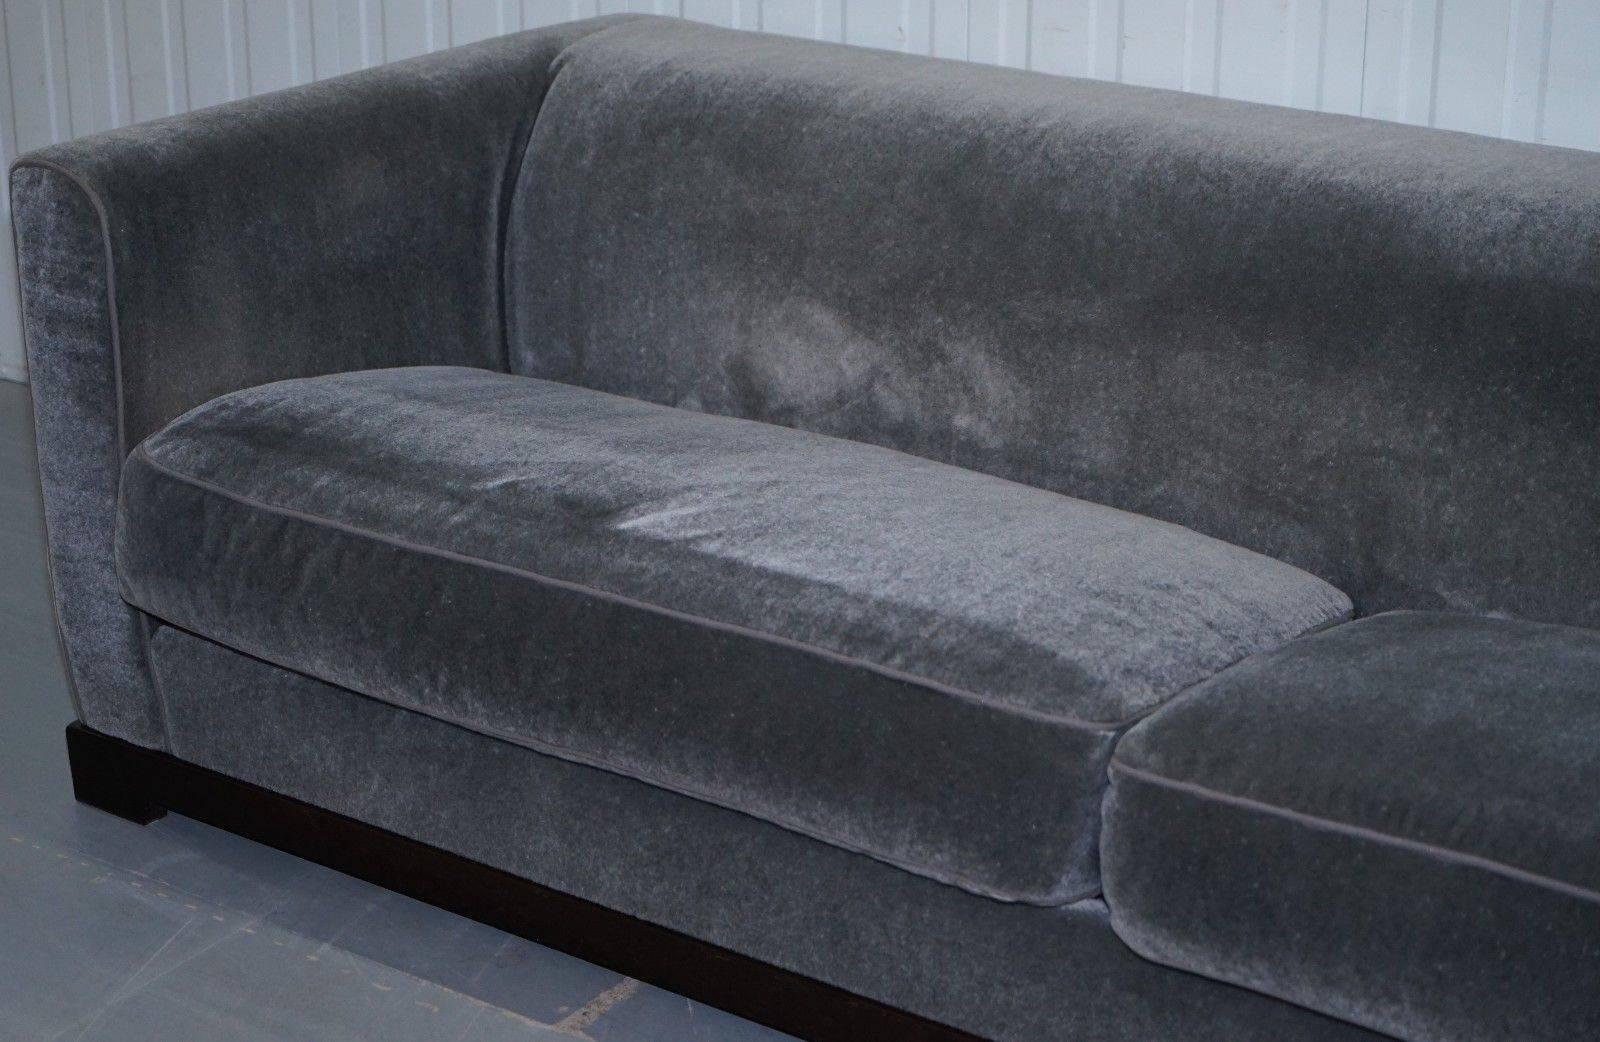 Stunning Promemoria Wanda 4 seat silky soft velvet upholstery sofa with split panel feather filled cushions RRP £10500

Please note the delivery fee listed is just a guide, it covers within the M25 only, for an accurate quote please send me your